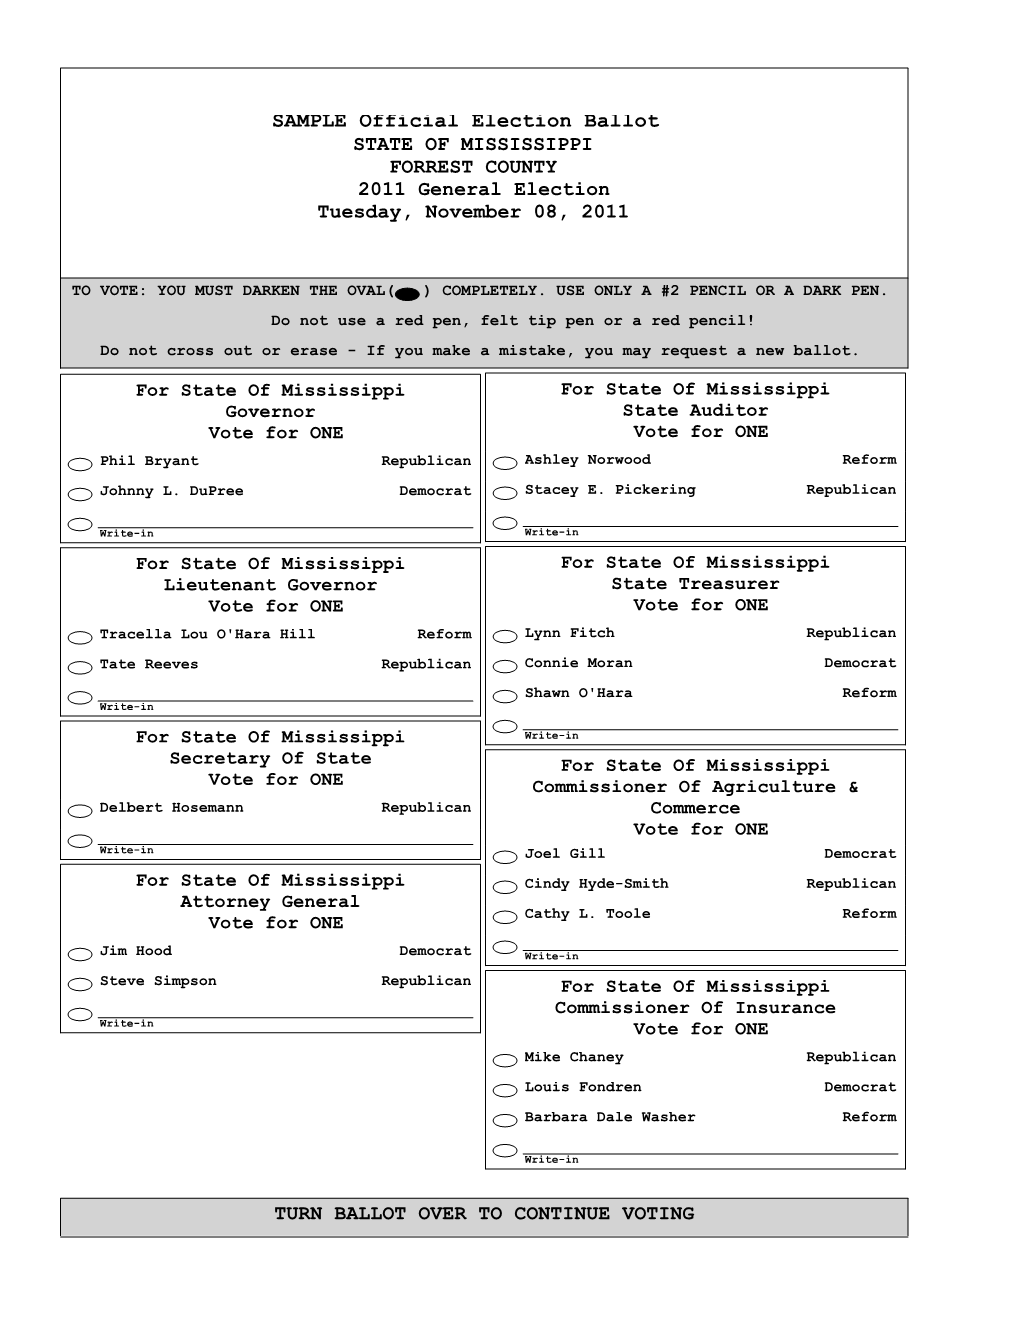 SAMPLE Official Election Ballot STATE of MISSISSIPPI FORREST COUNTY 2011 General Election Tuesday, November 08, 2011 TURN BALLOT